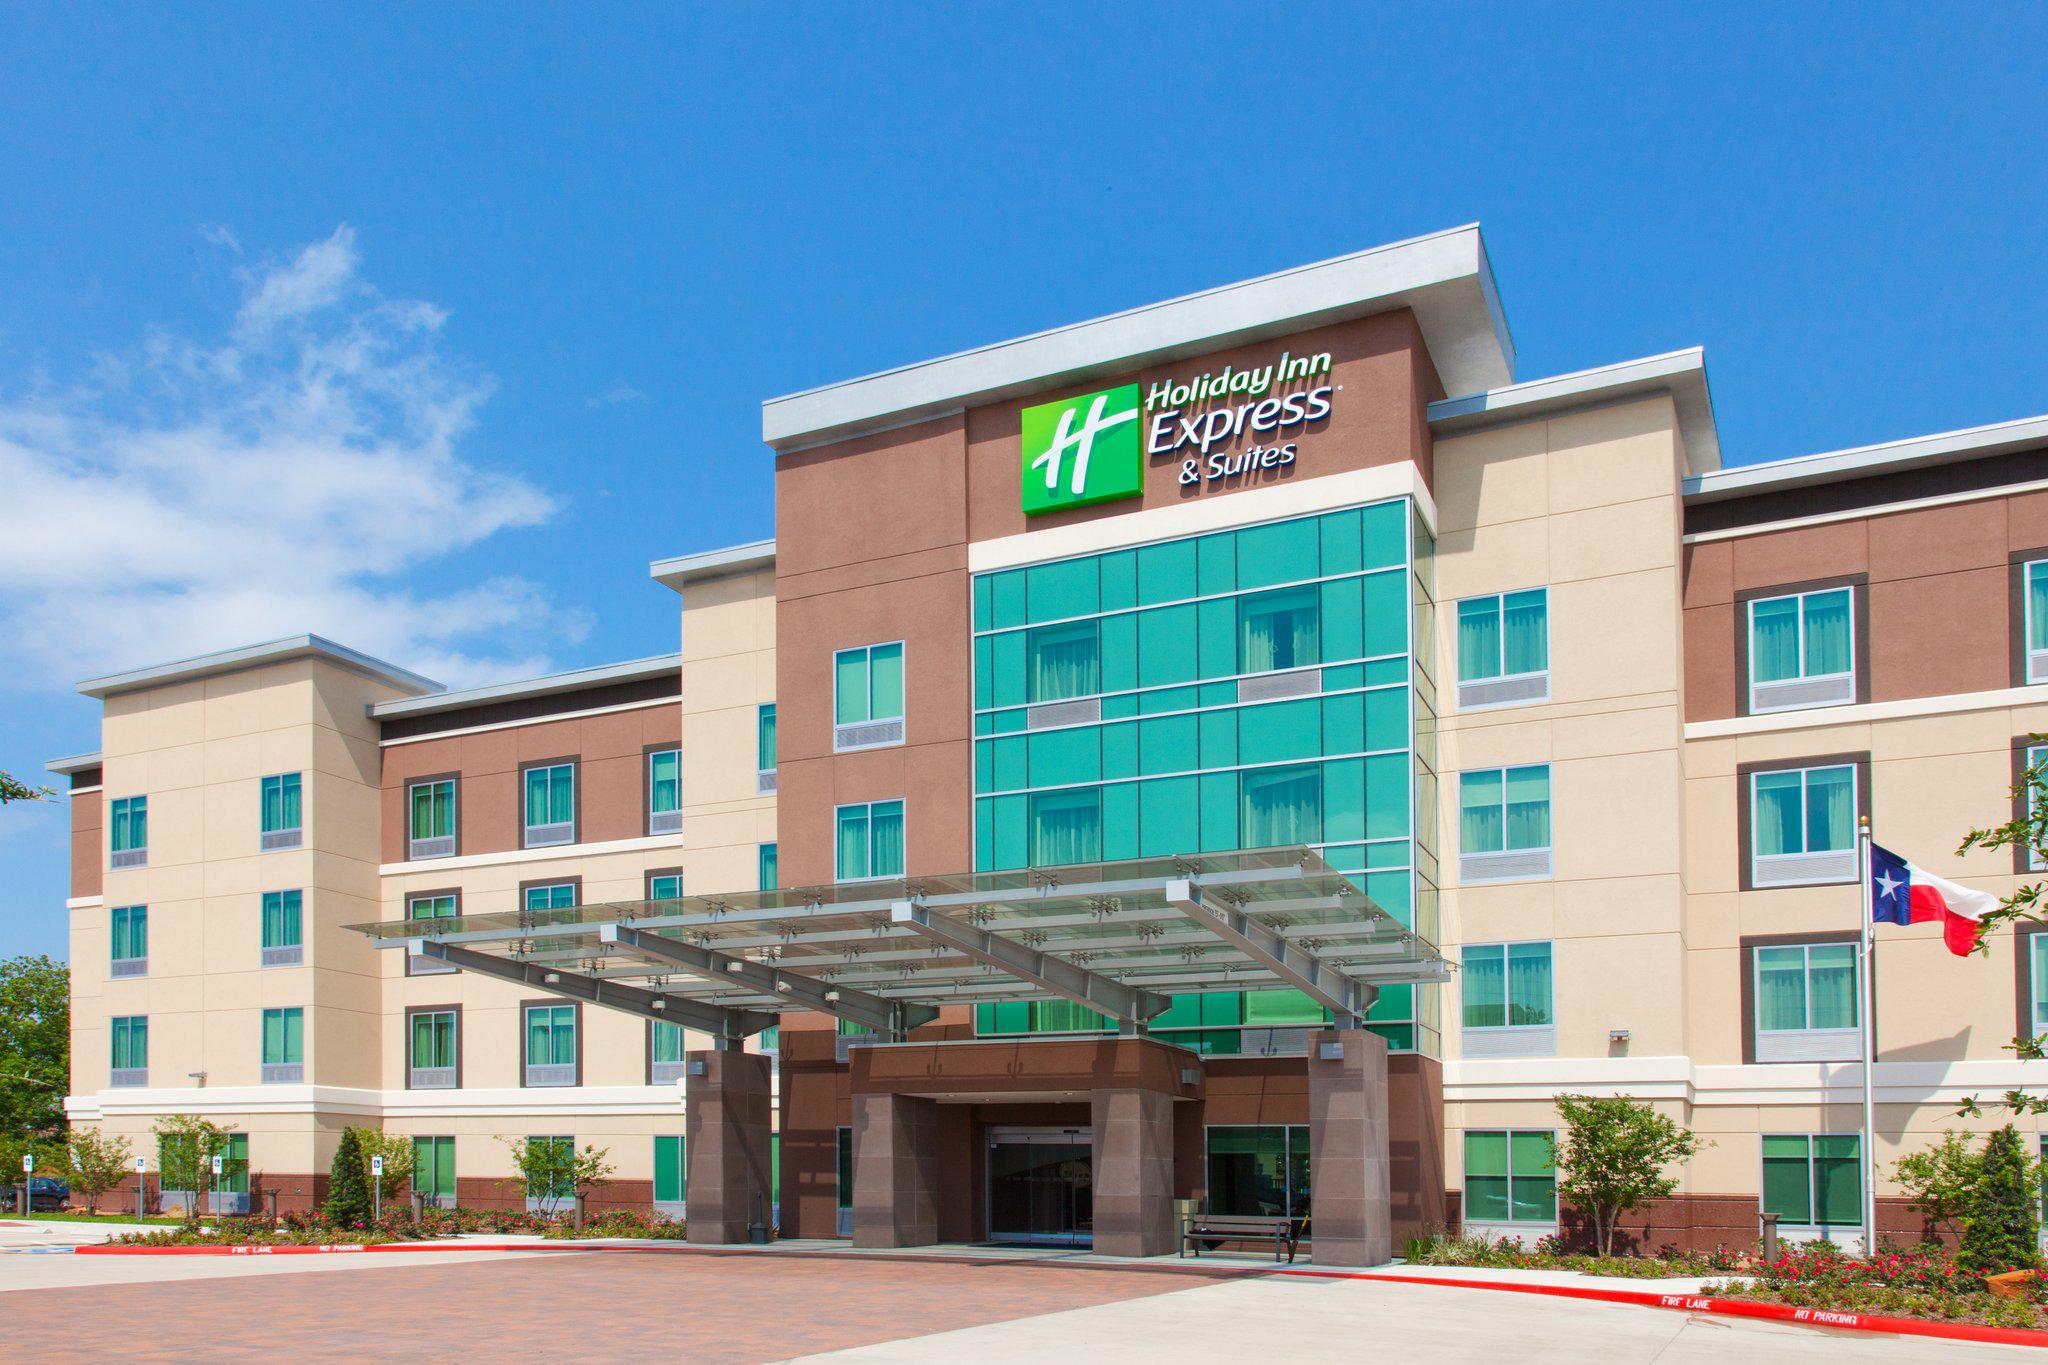 Holiday Inn Express & Suites Houston S - Medical Ctr Area Photo